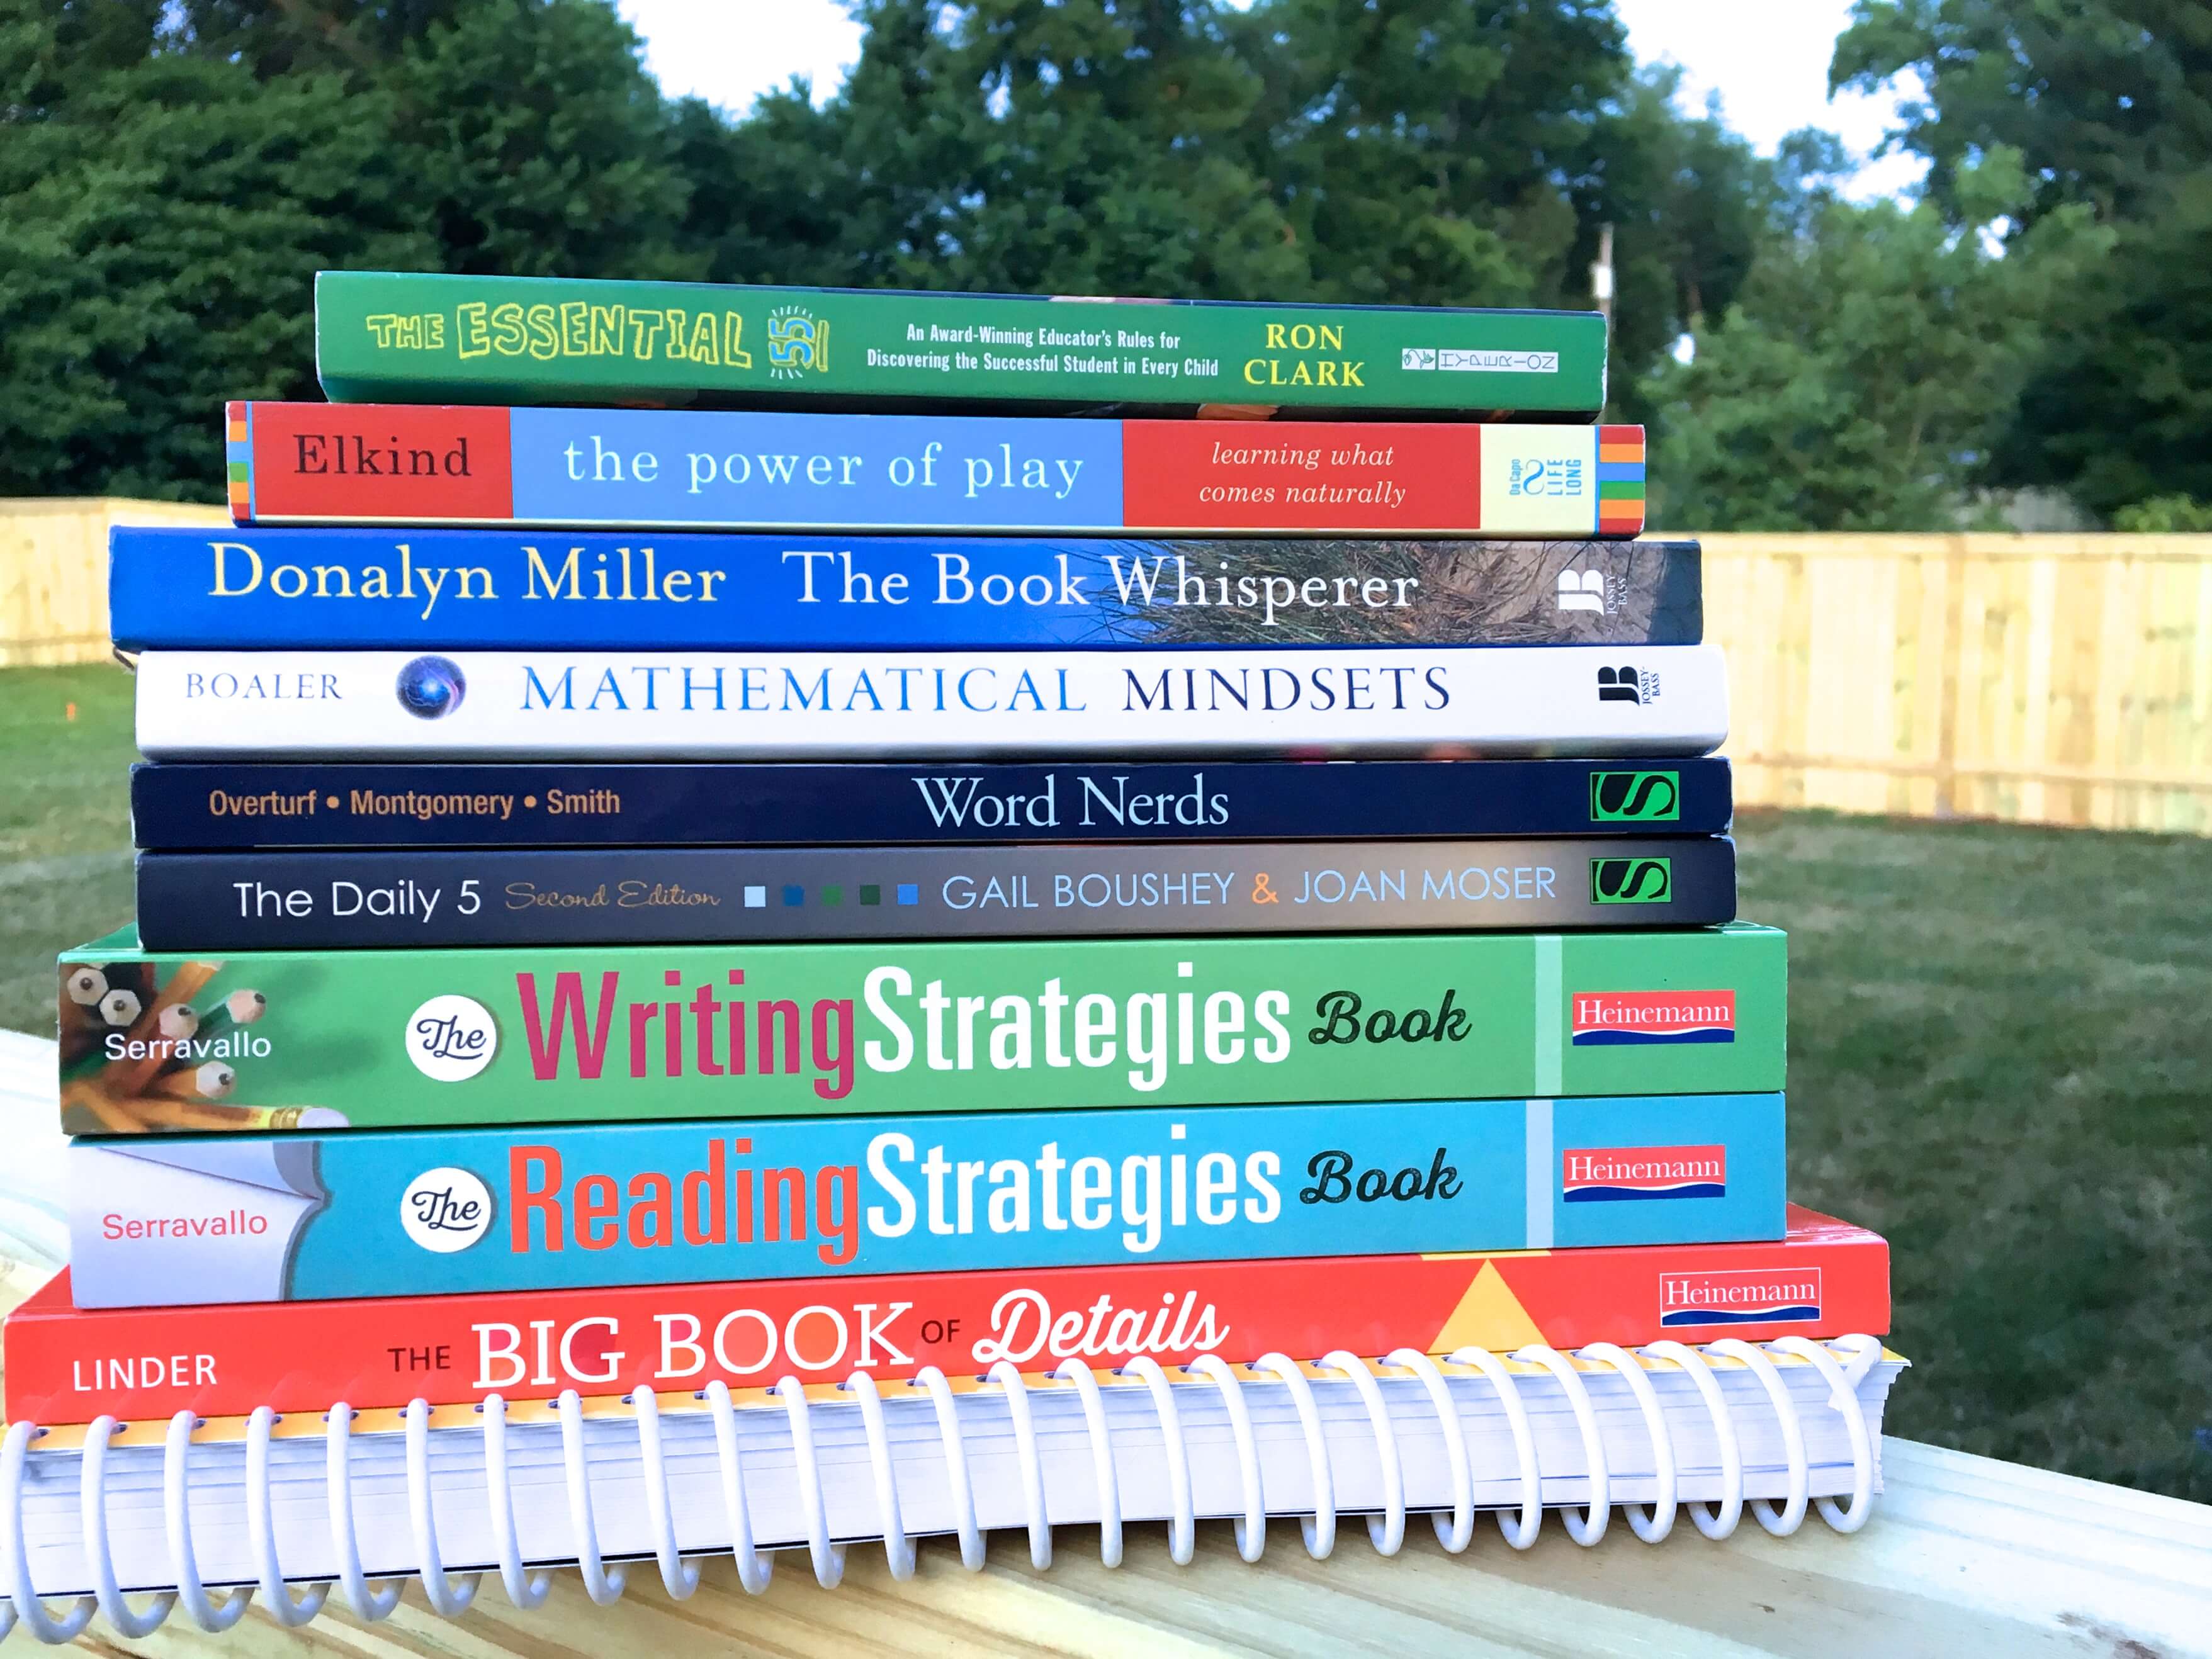 These 10 Professional Development books are ideal for molding, honing, and guiding your instruction. Some will remind you why you teach, others will reignite your excitement for welcoming a new classroom of friends, and most will change your teaching practice for the better.